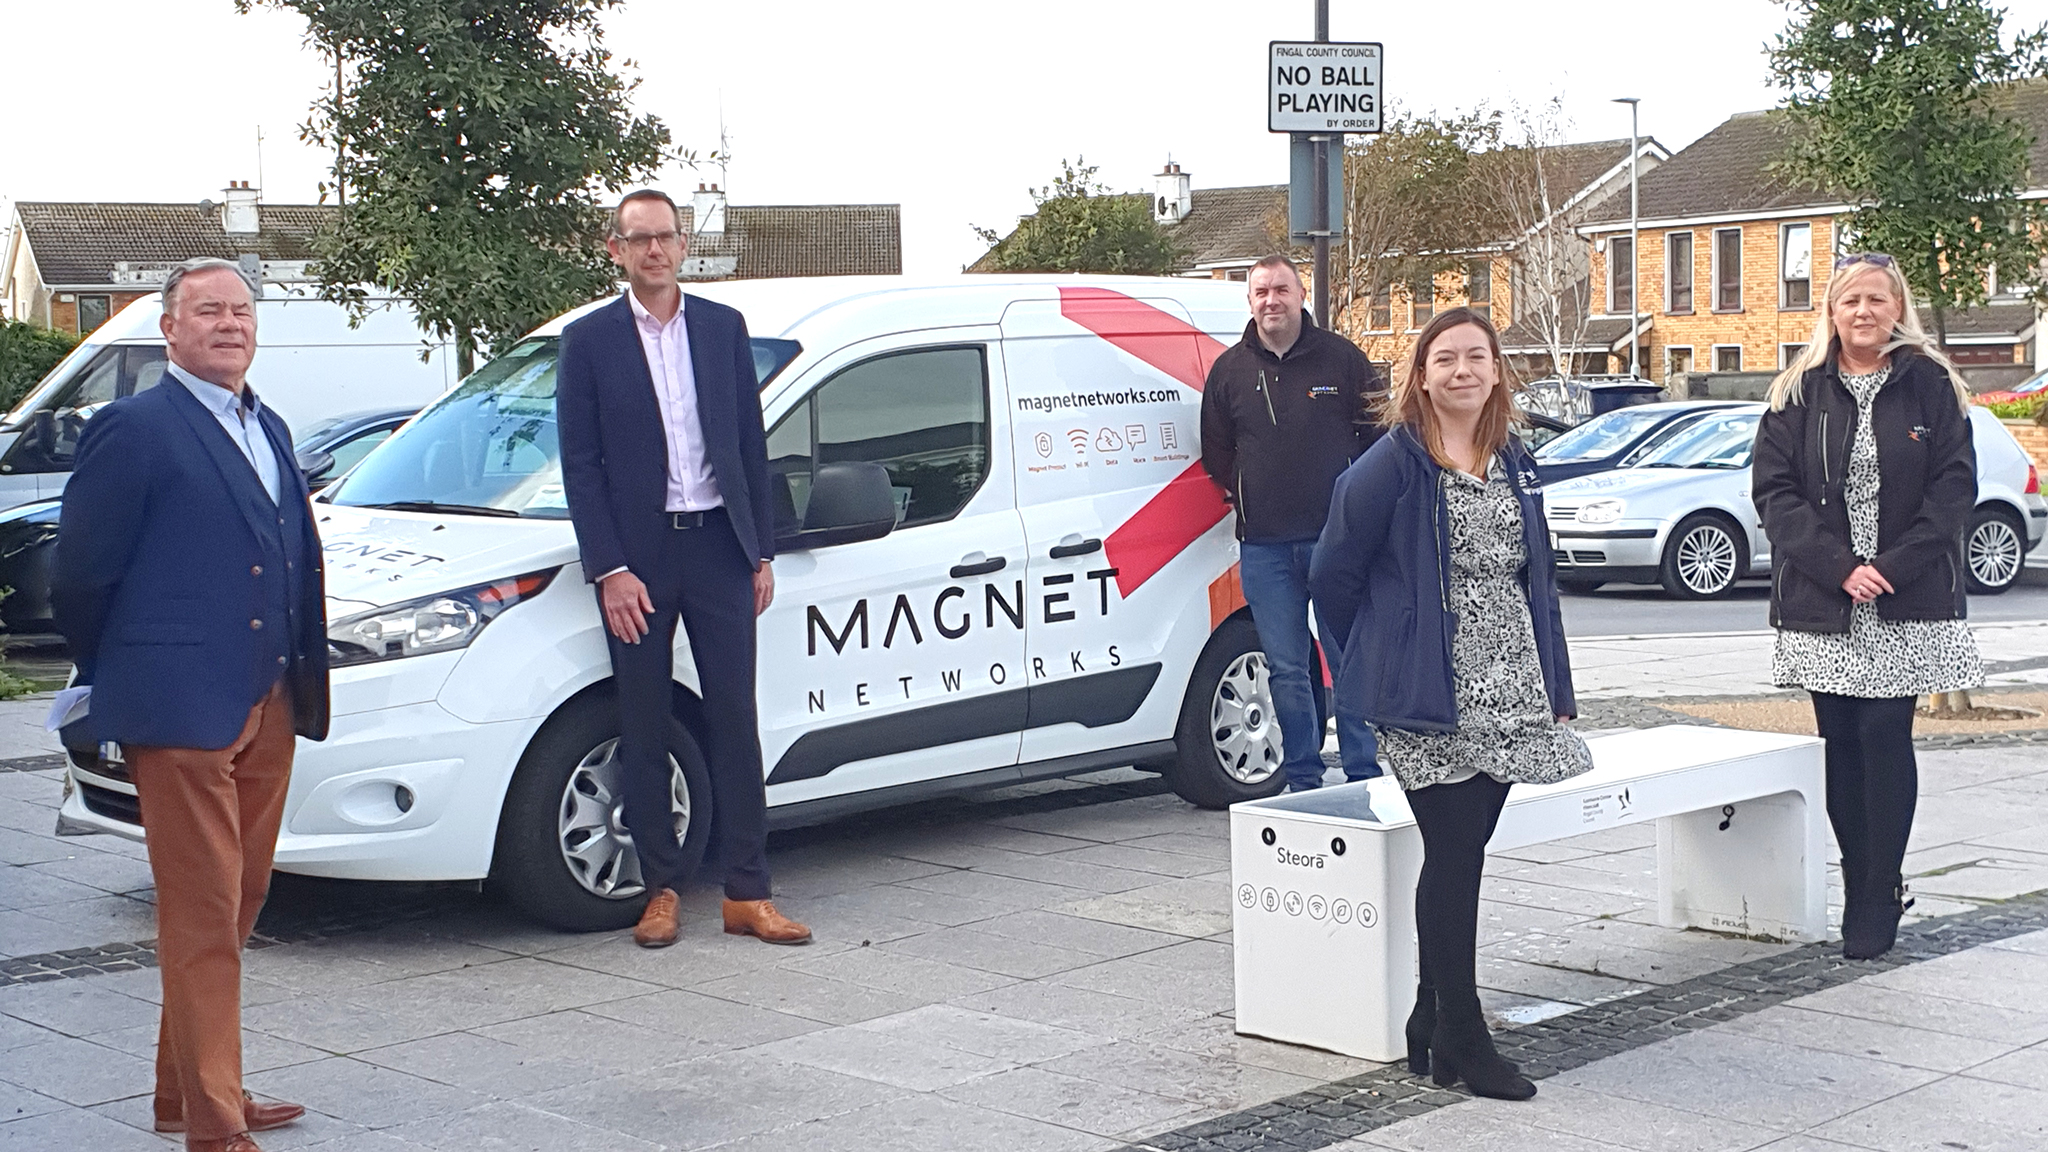 Magnet Networks, Fingal County Council and Fingal Chamber representatives in Rush to engage with local businesses in the next phase of delivering free outdoor public Wi-Fi